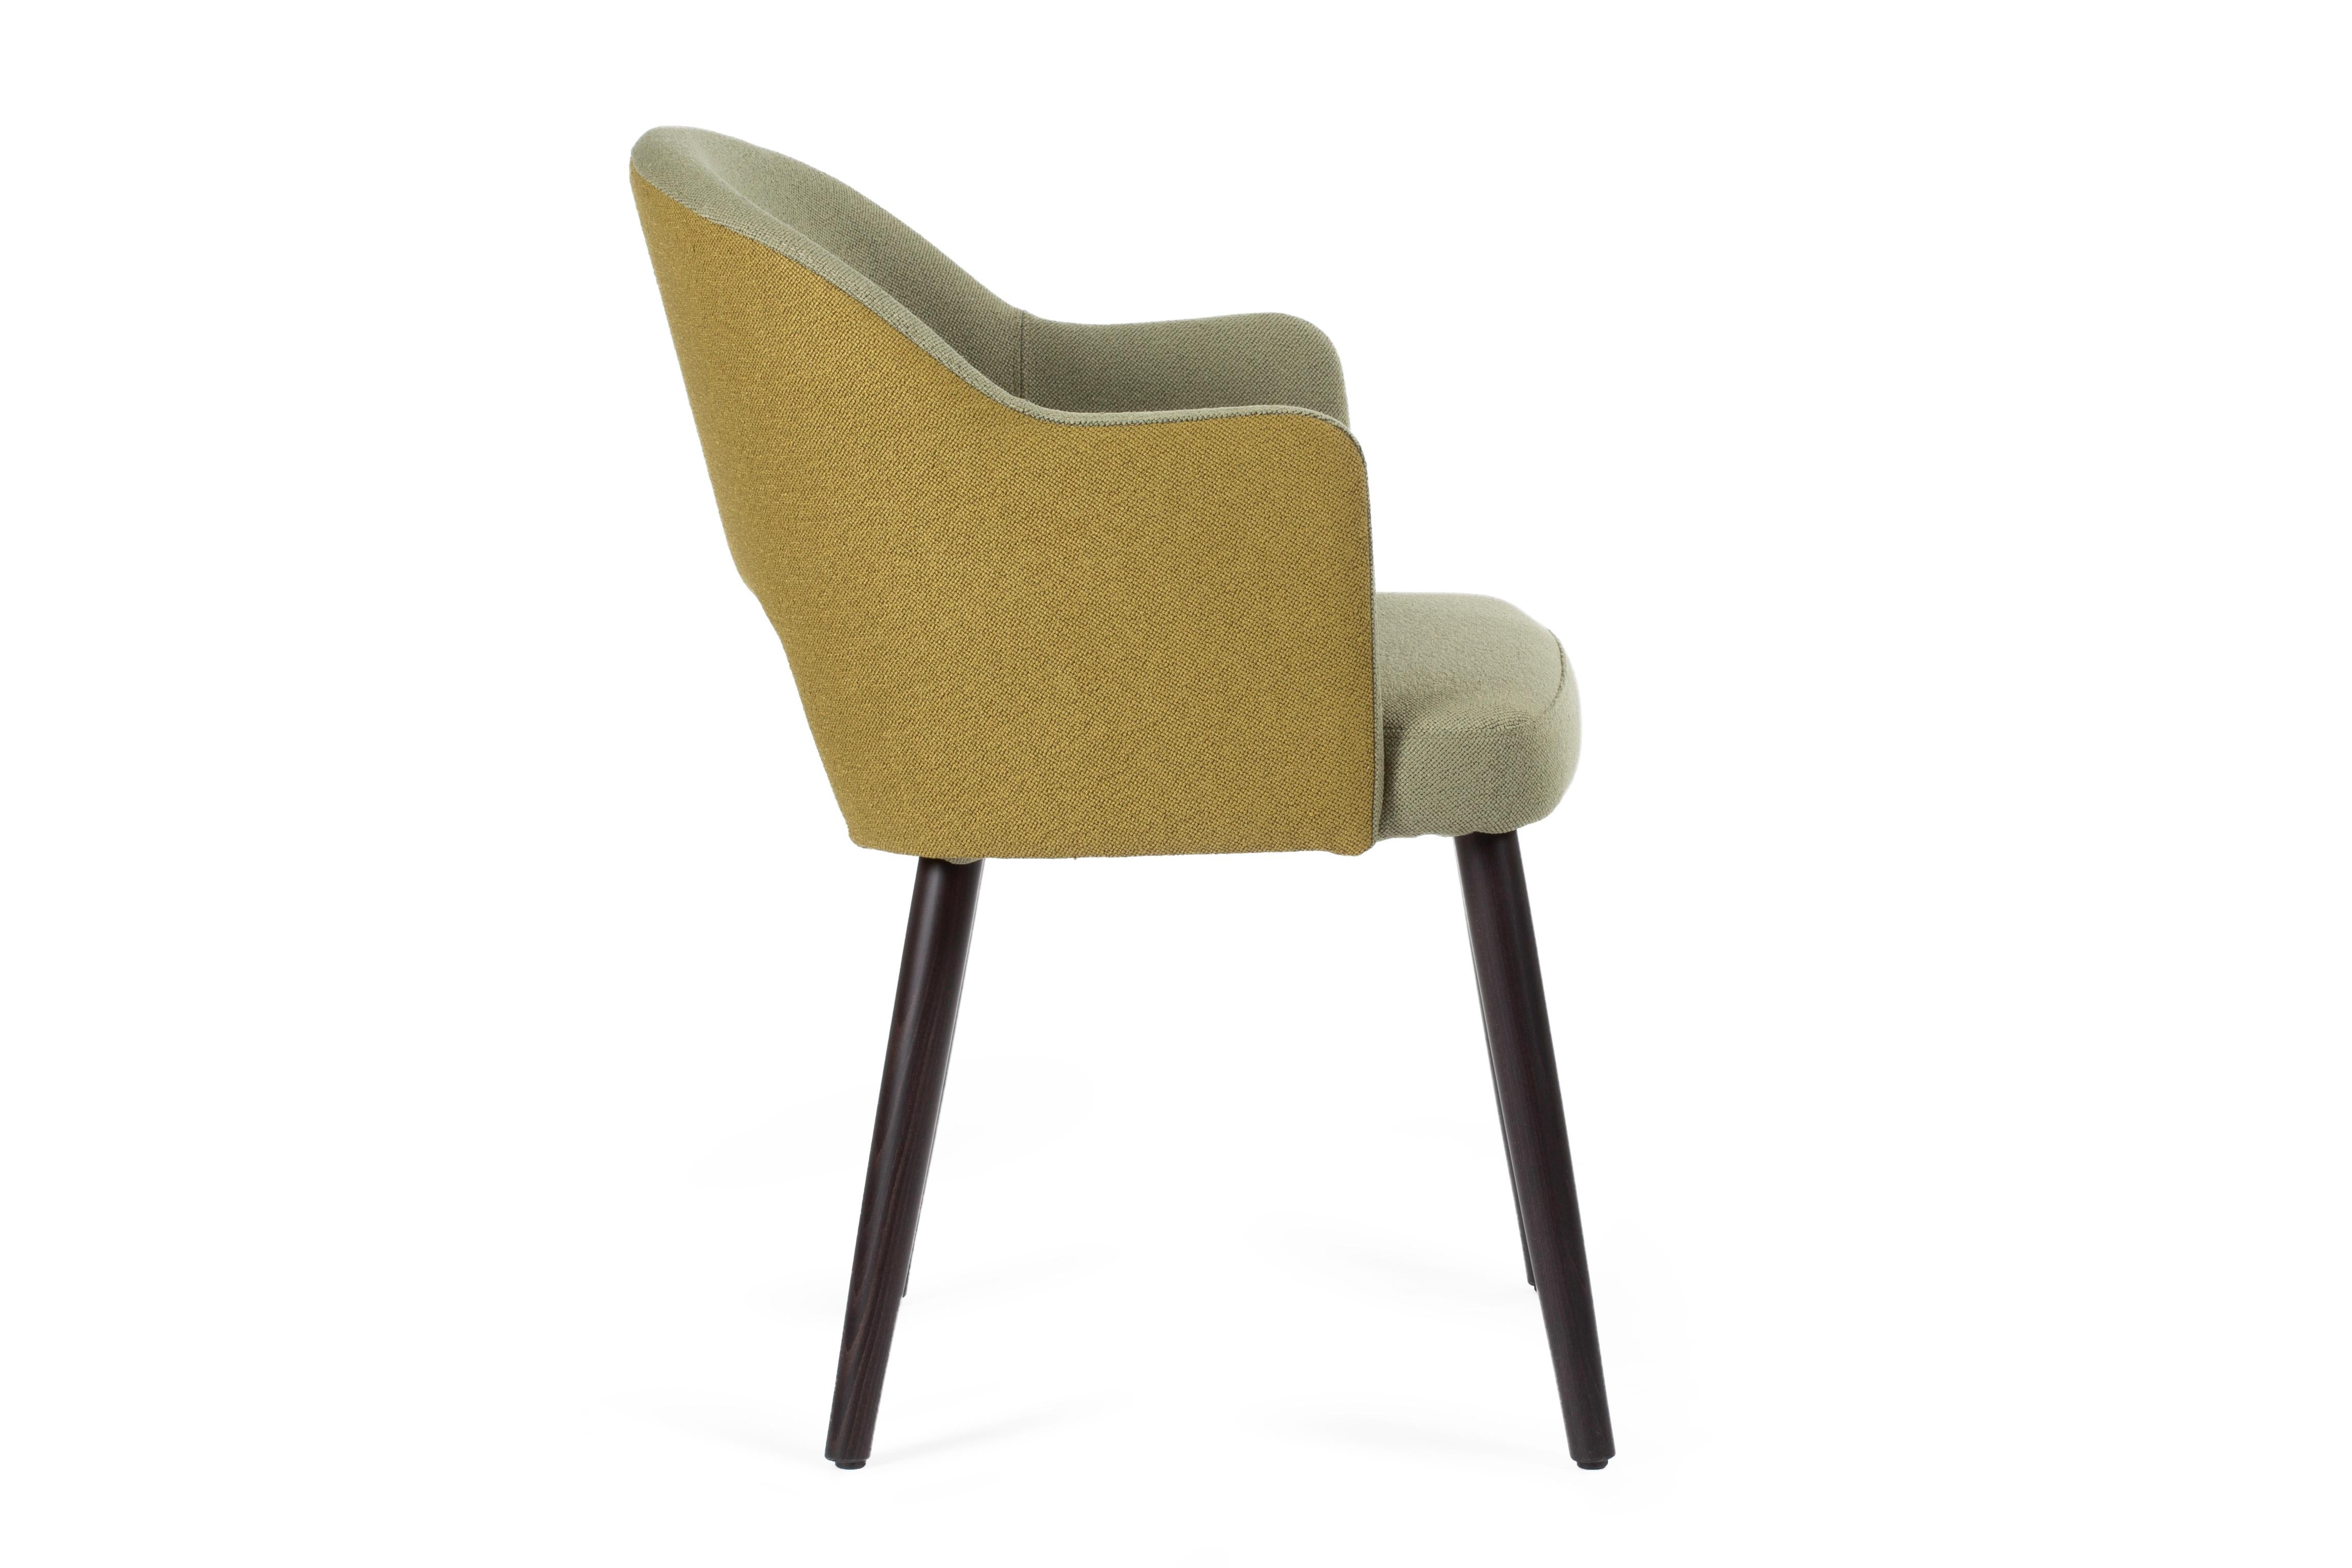 Upholstered armchair in Free Life® fabric (available in different colours) and wooden legs. Perfect seating for living and kitchen spaces.

Features
Chair with upholstered seat and backrest covered in Free Life® fabric with special